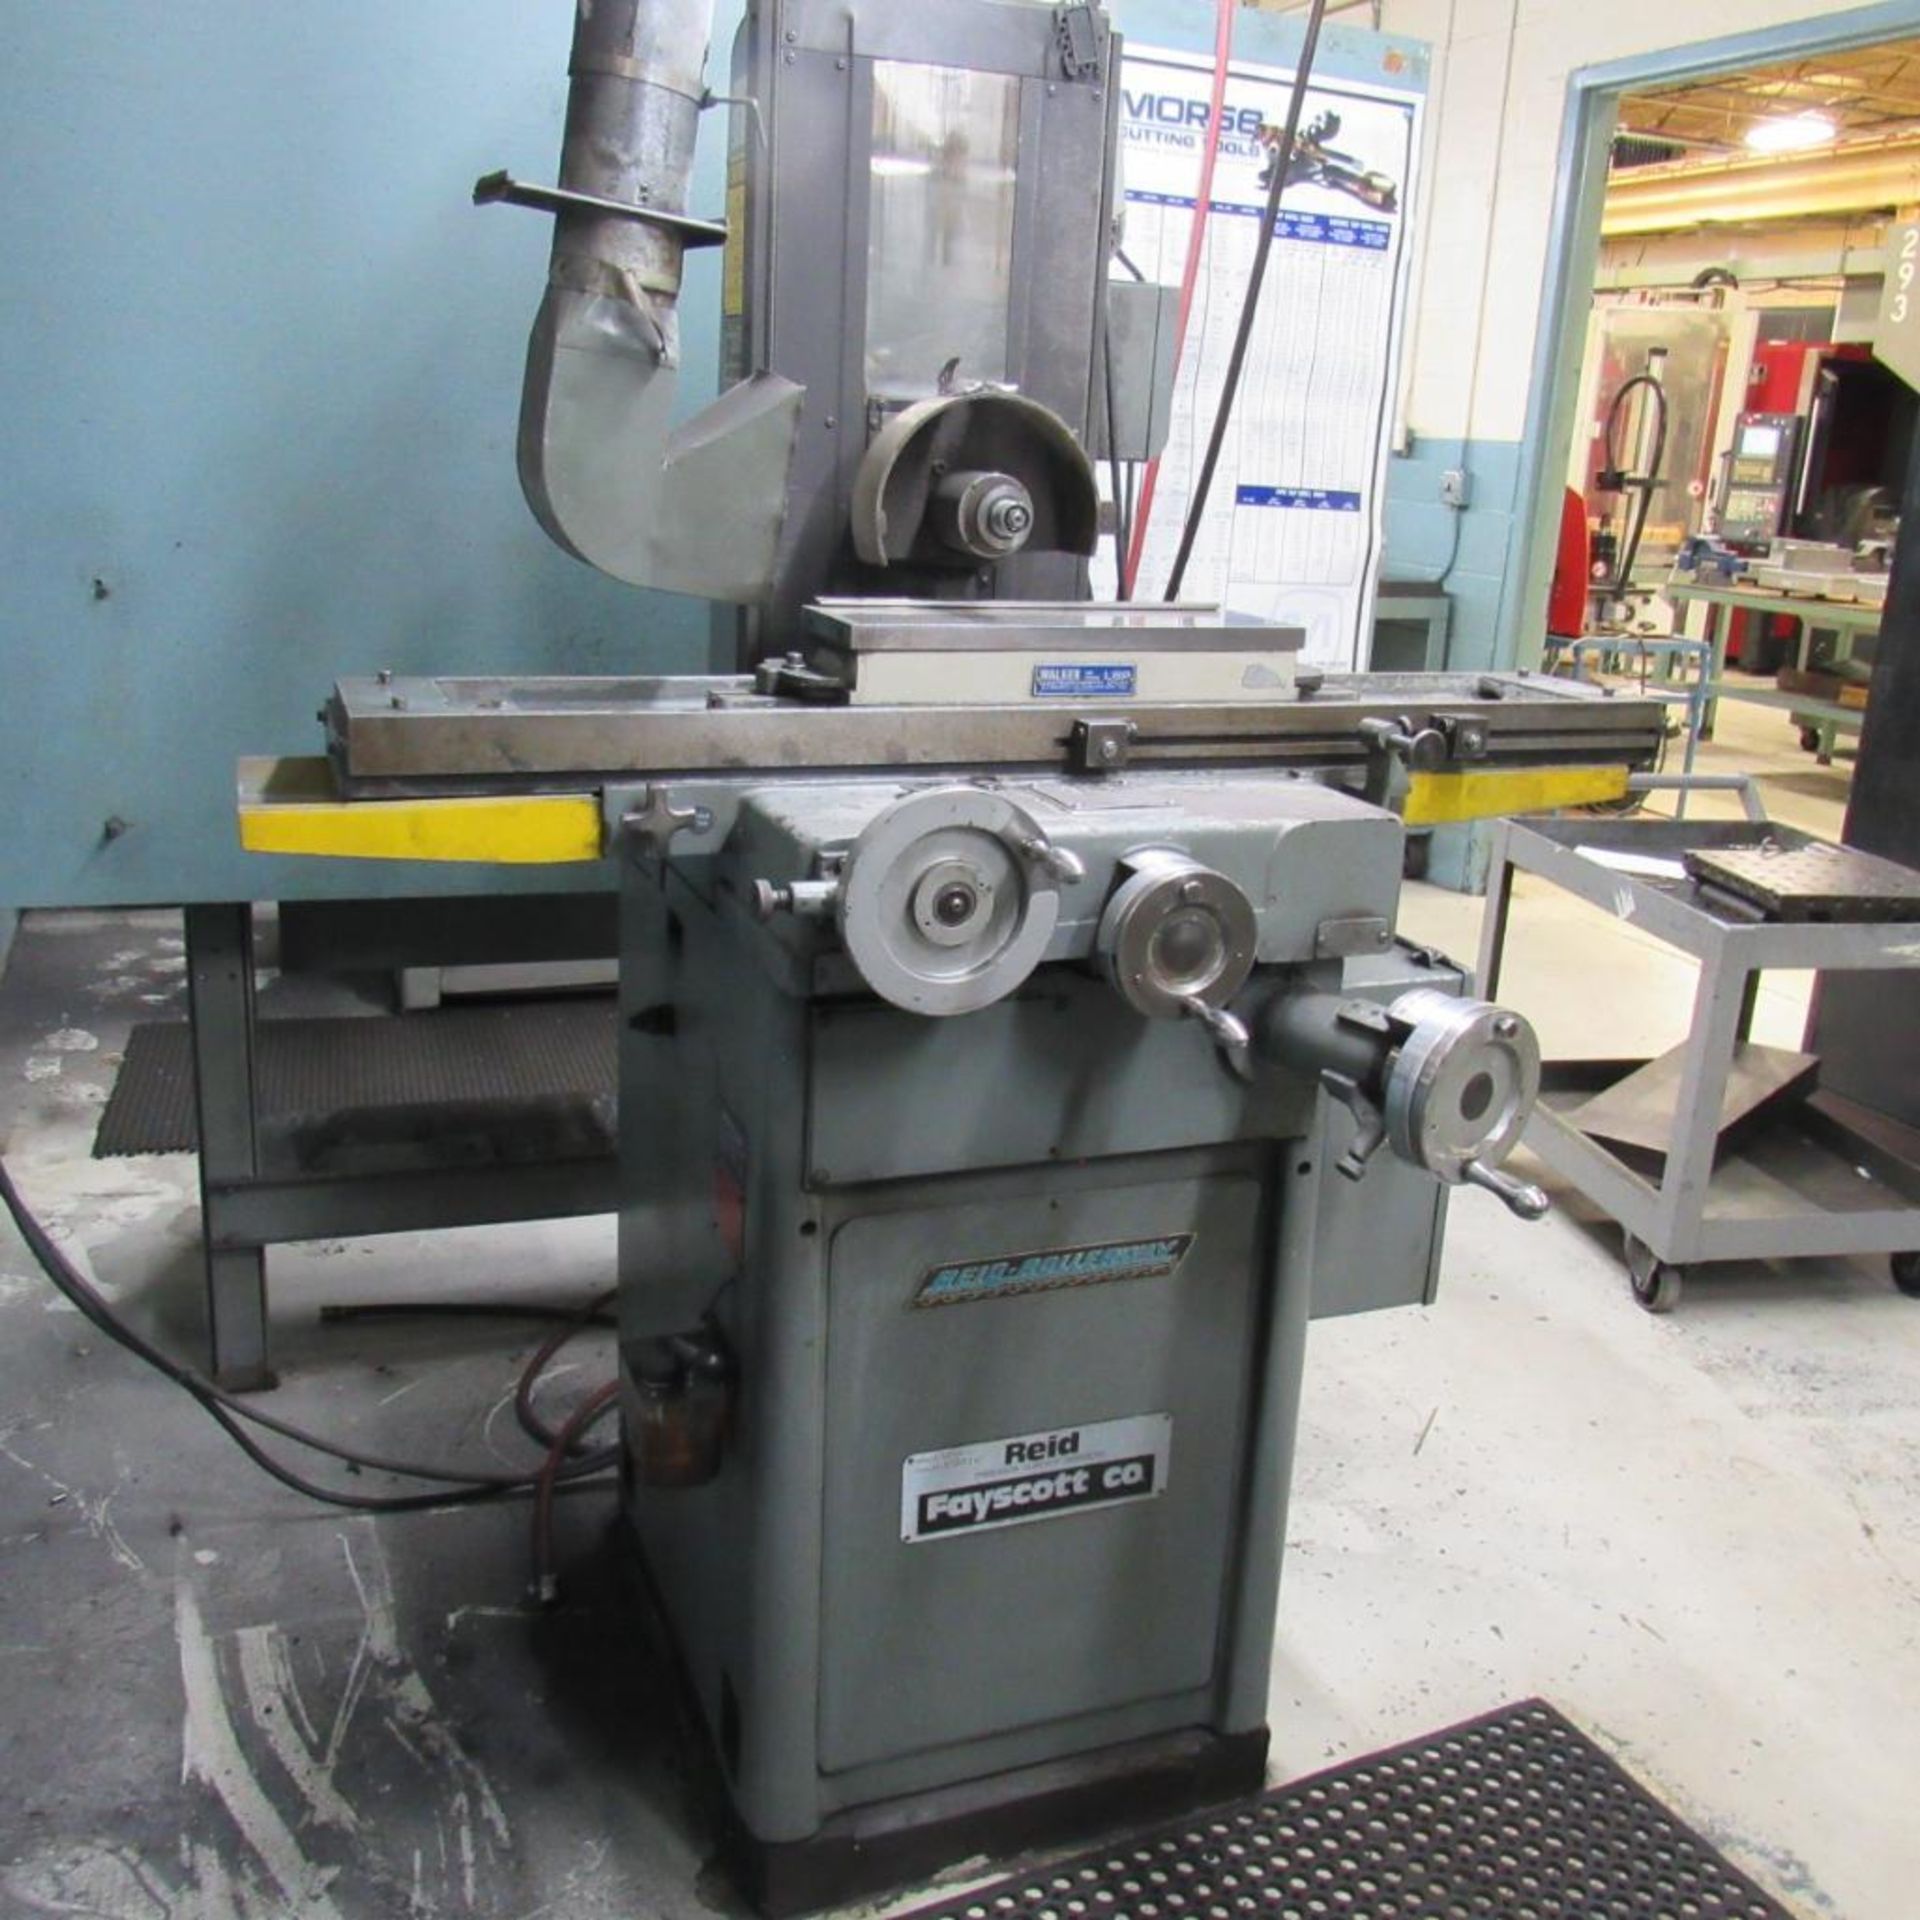 Reid 618 6" x 18" Hand Feed Surface Grinder with Walker 6" x 18" Electro-Magnetic Chuck, Neutrol- - Image 3 of 5